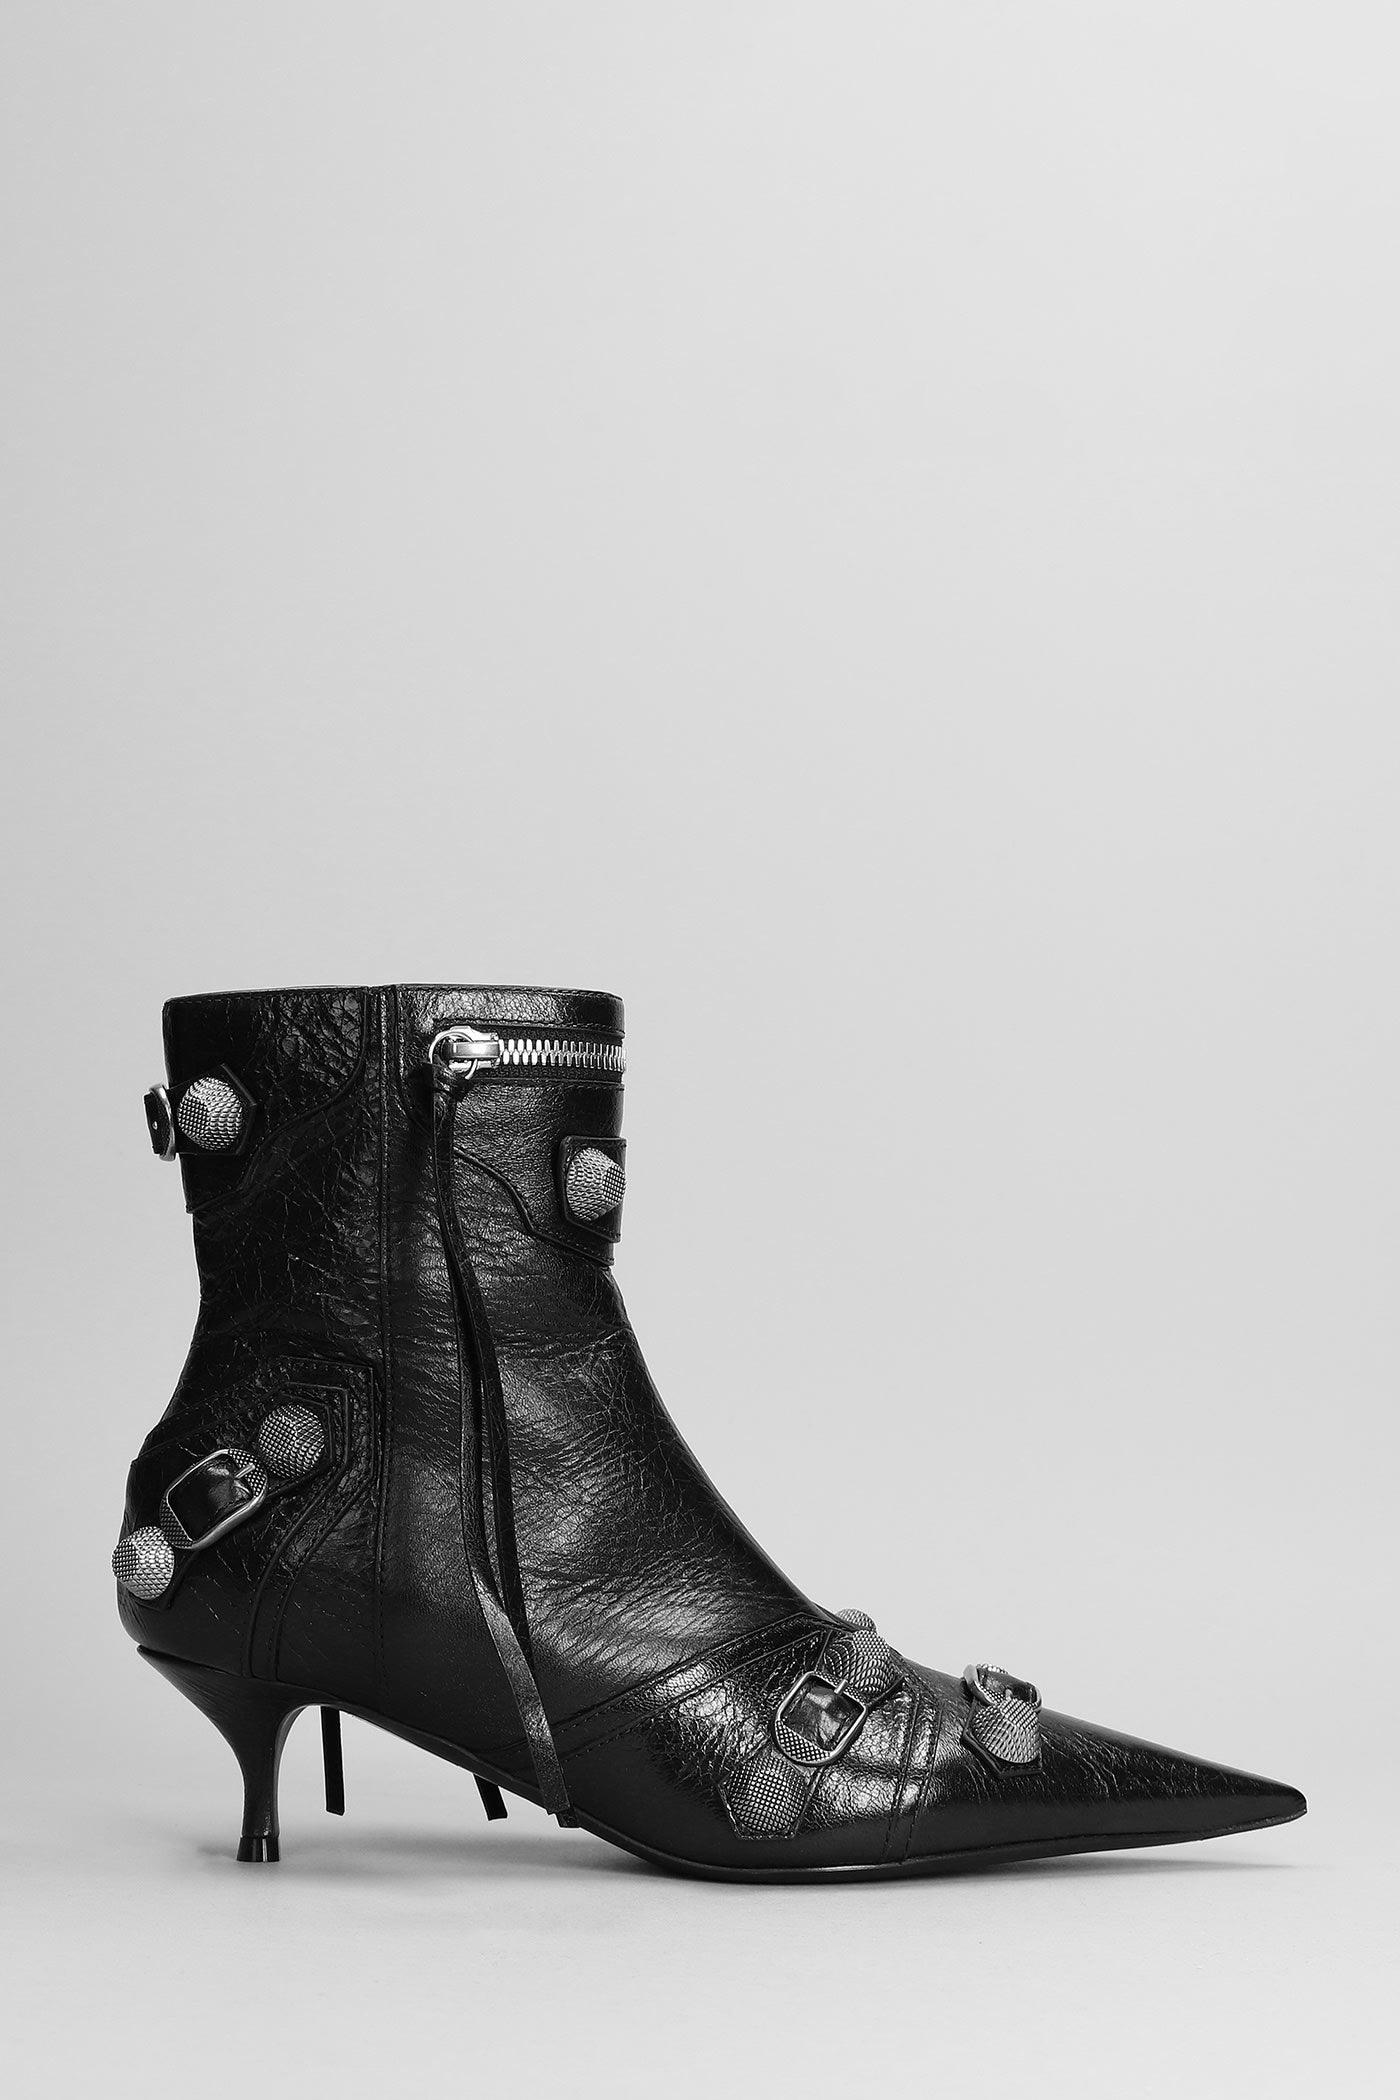 Balenciaga Low Heels Ankle Boots In Leather in Black | Lyst